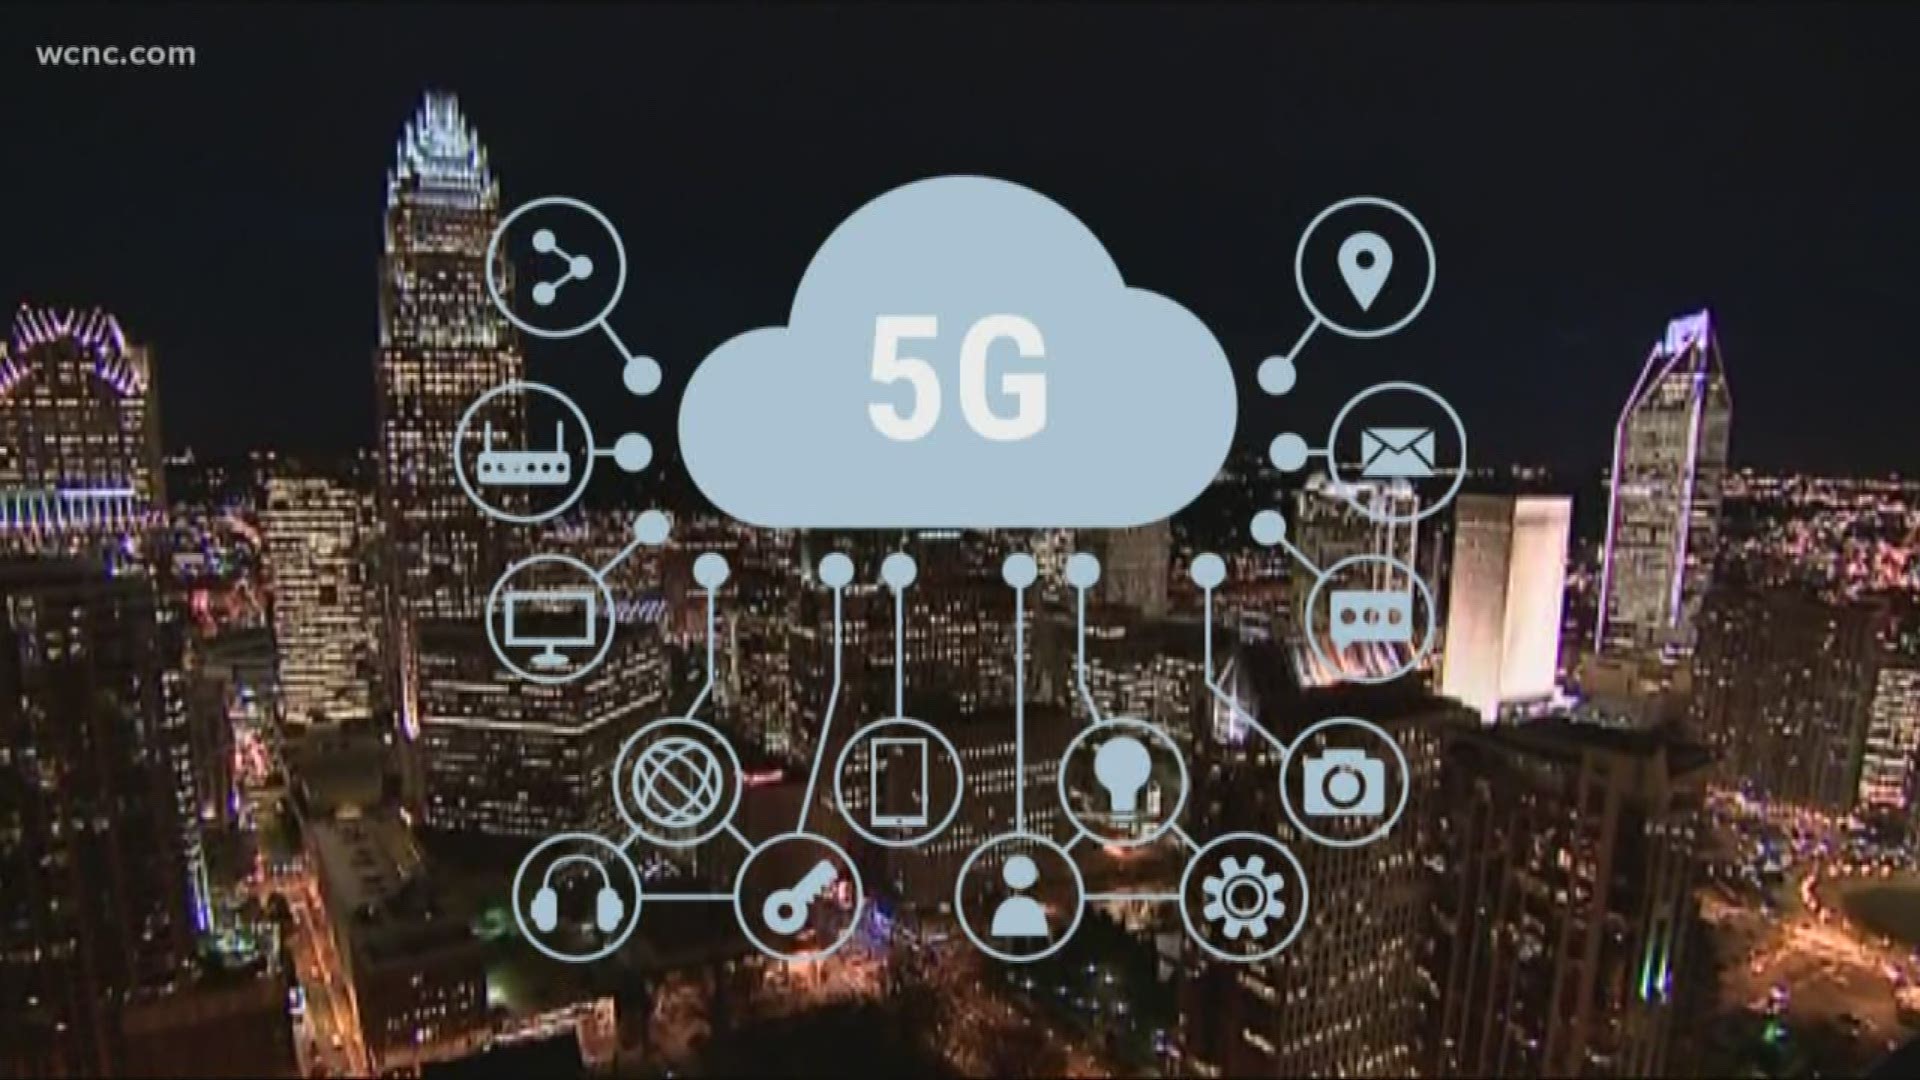 5G services already rolling in the Queen City. City leaders tell NBC Charlotte more 5G services are on track for the RNC.